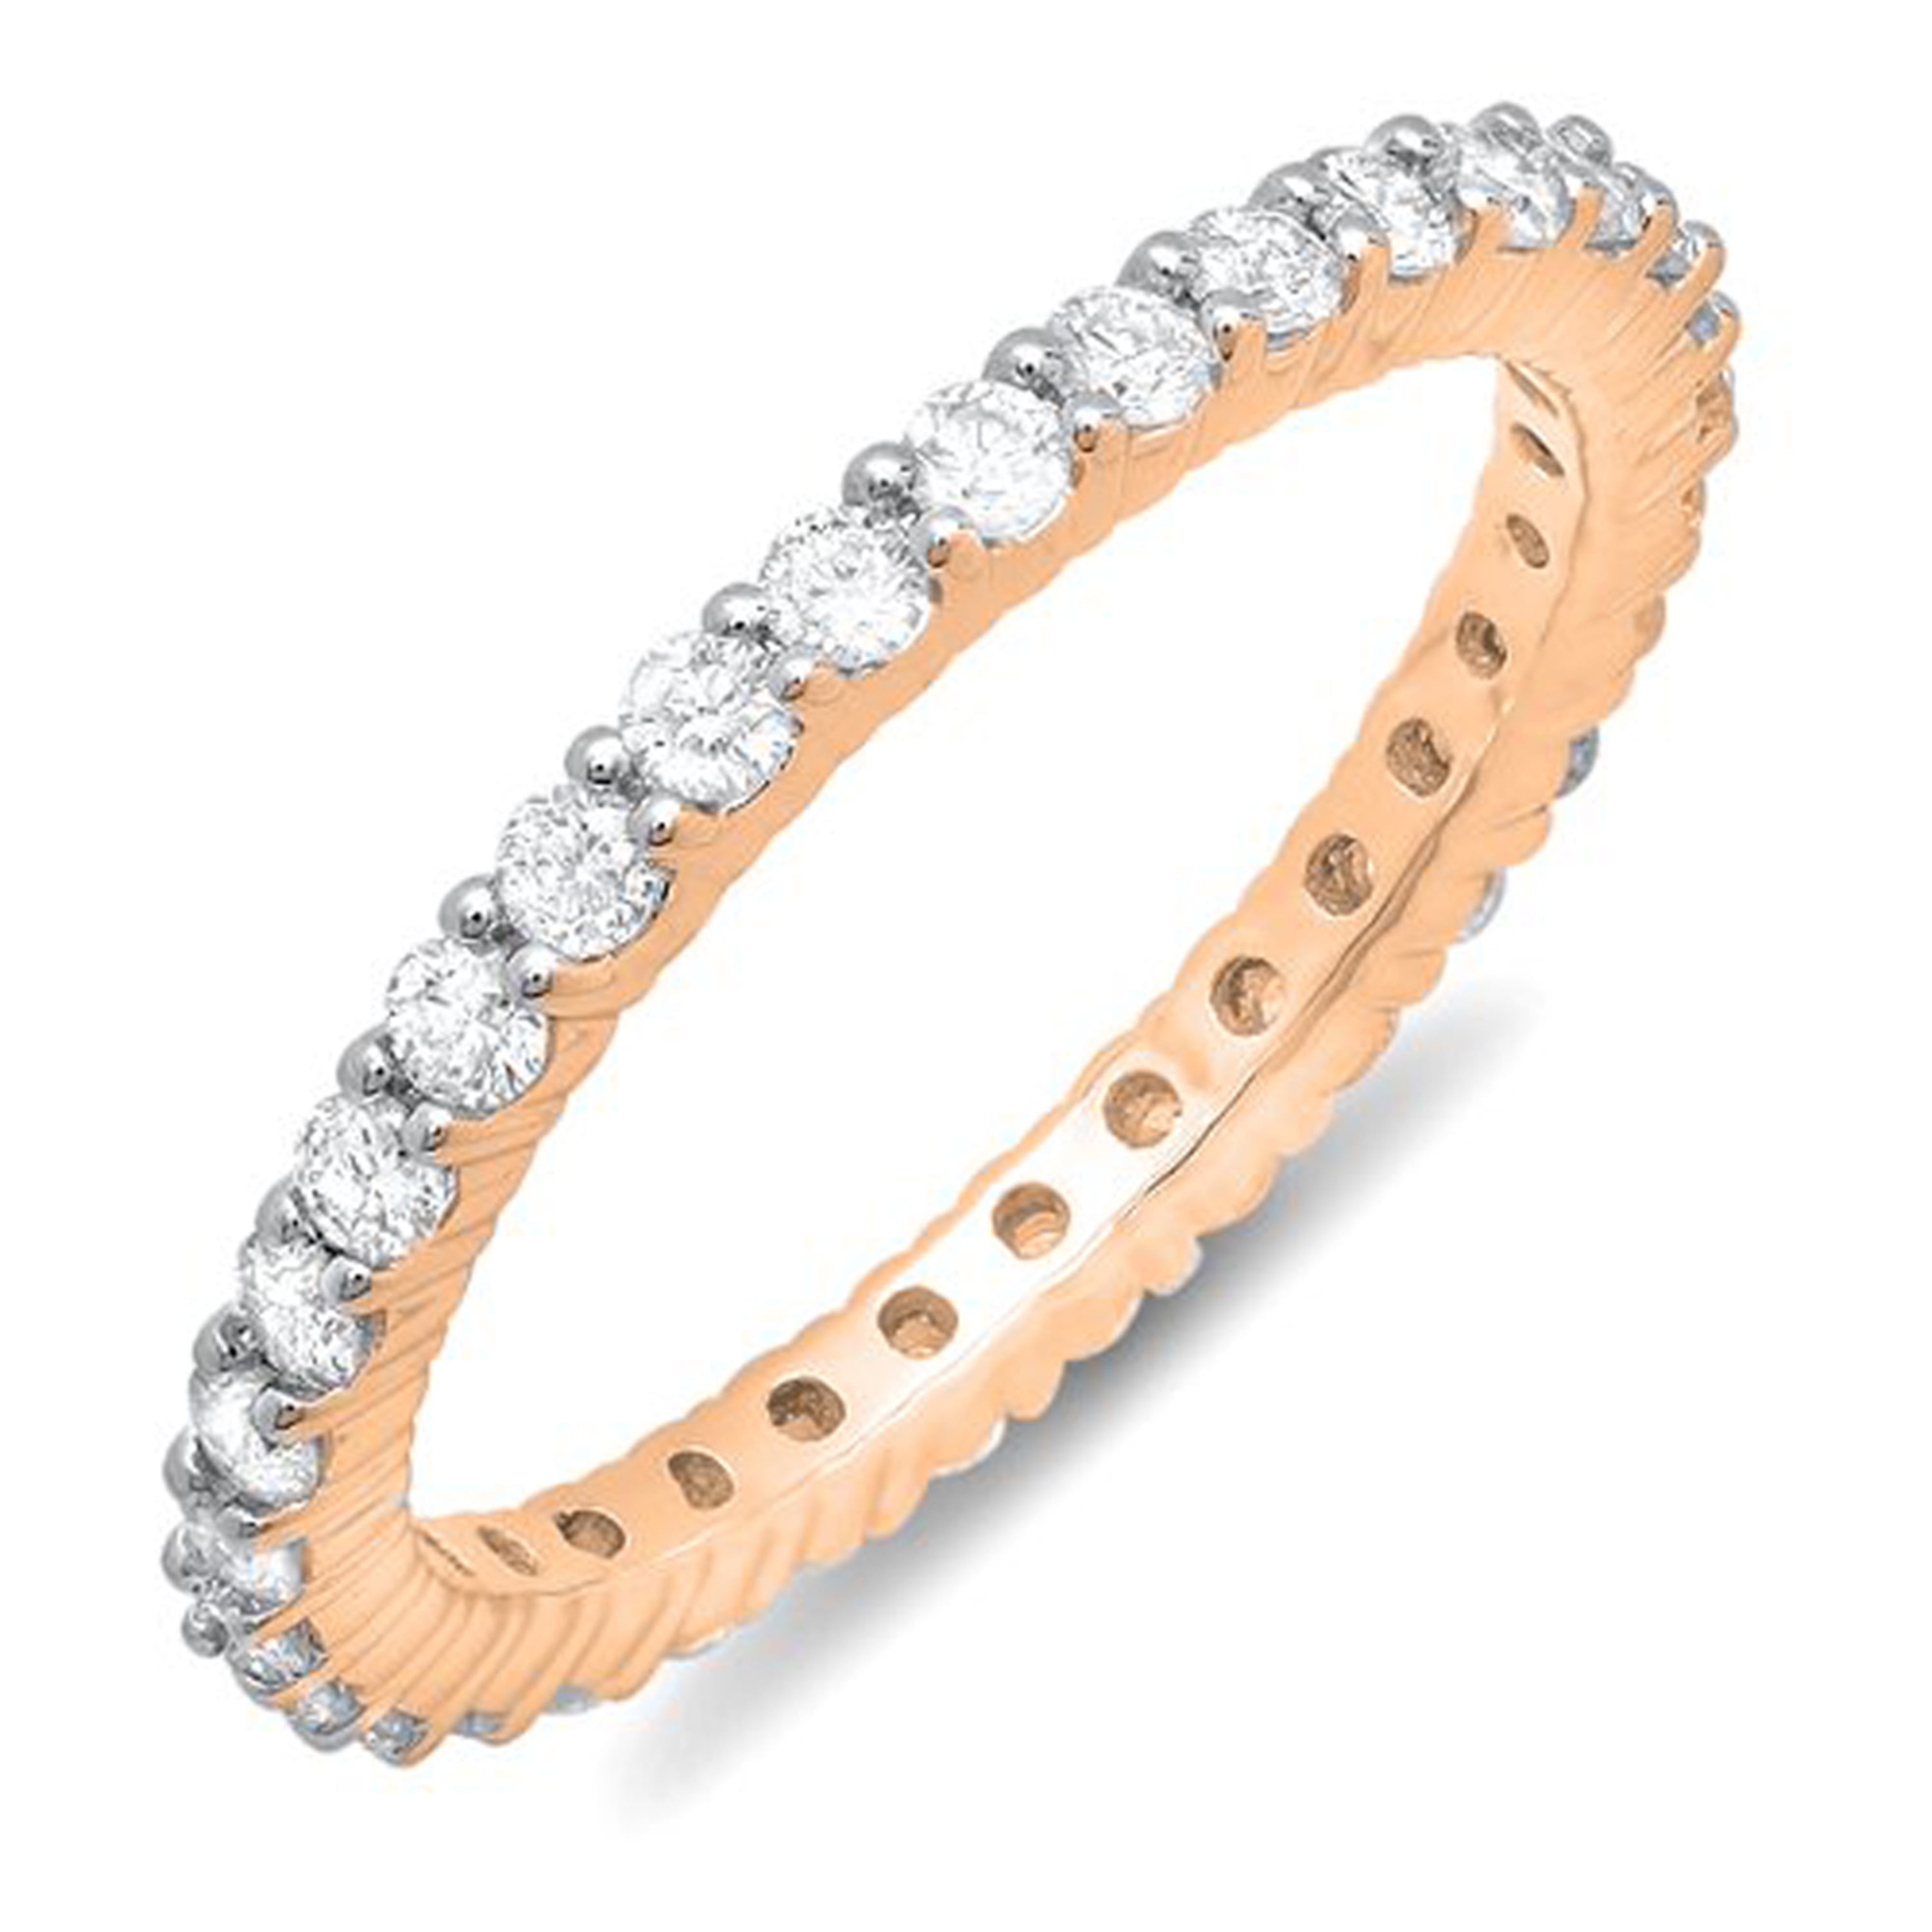 1.00 Ct 14K White Gold Round Stackable Eternity Band Endless Anniversary Ring 